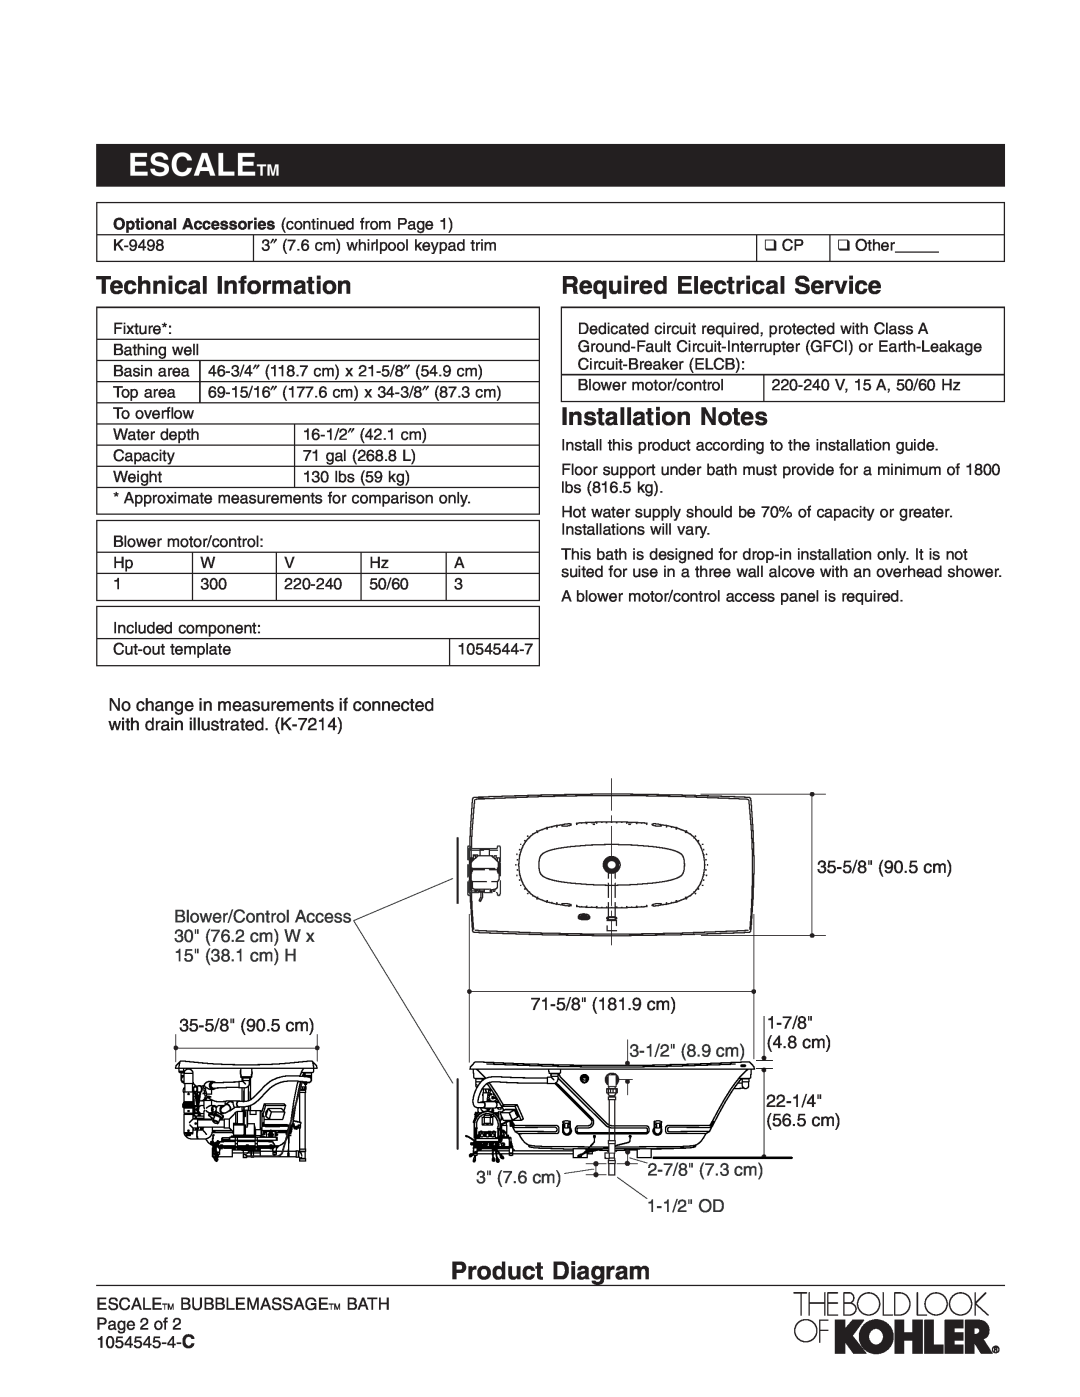 Kohler K-11343-GCR Technical Information, Required Electrical Service, Installation Notes, Product Diagram, 35-5/890.5 cm 